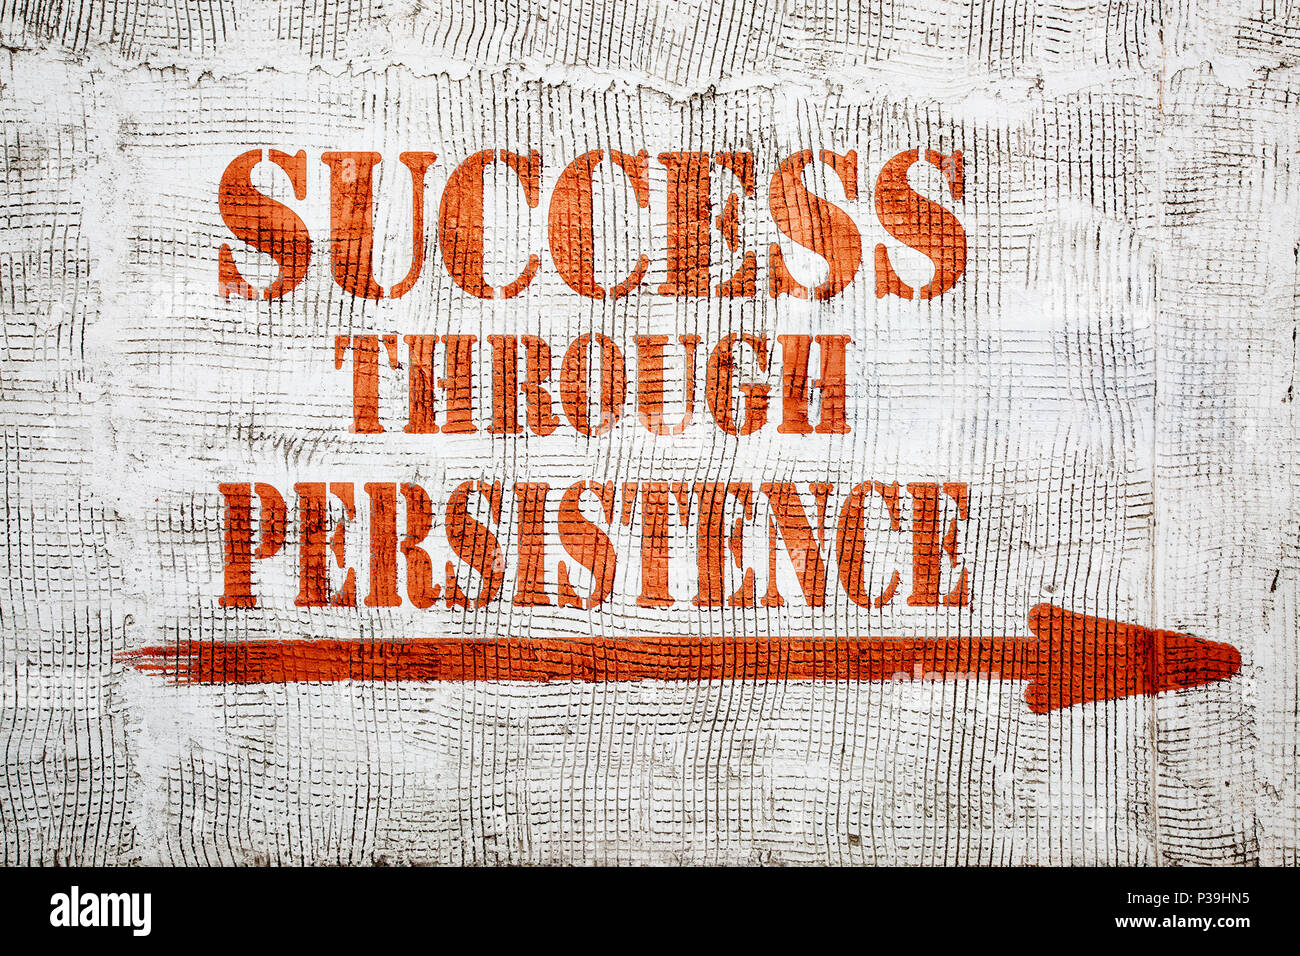 success through persistence - graffiti sign with arrow on stucco wall Stock Photo